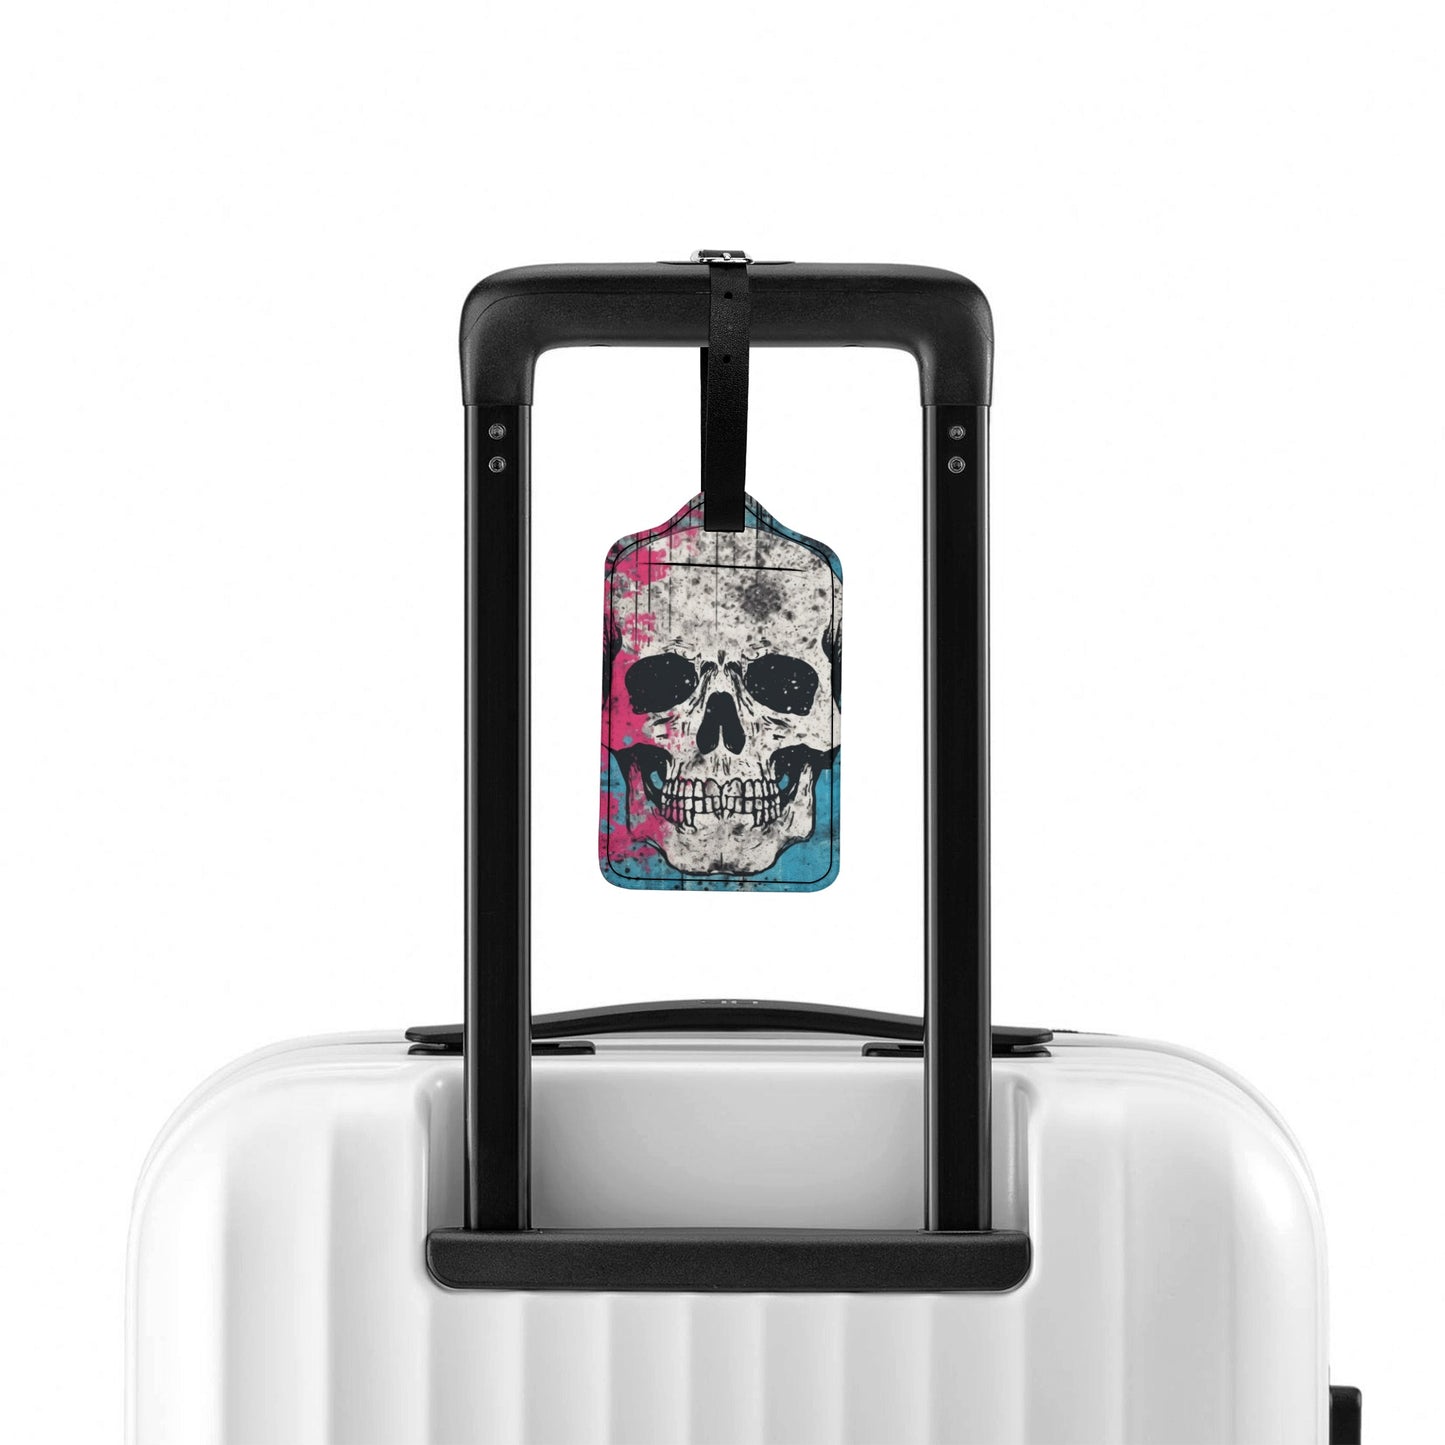 Blue And Pink Skull Luggage Tag